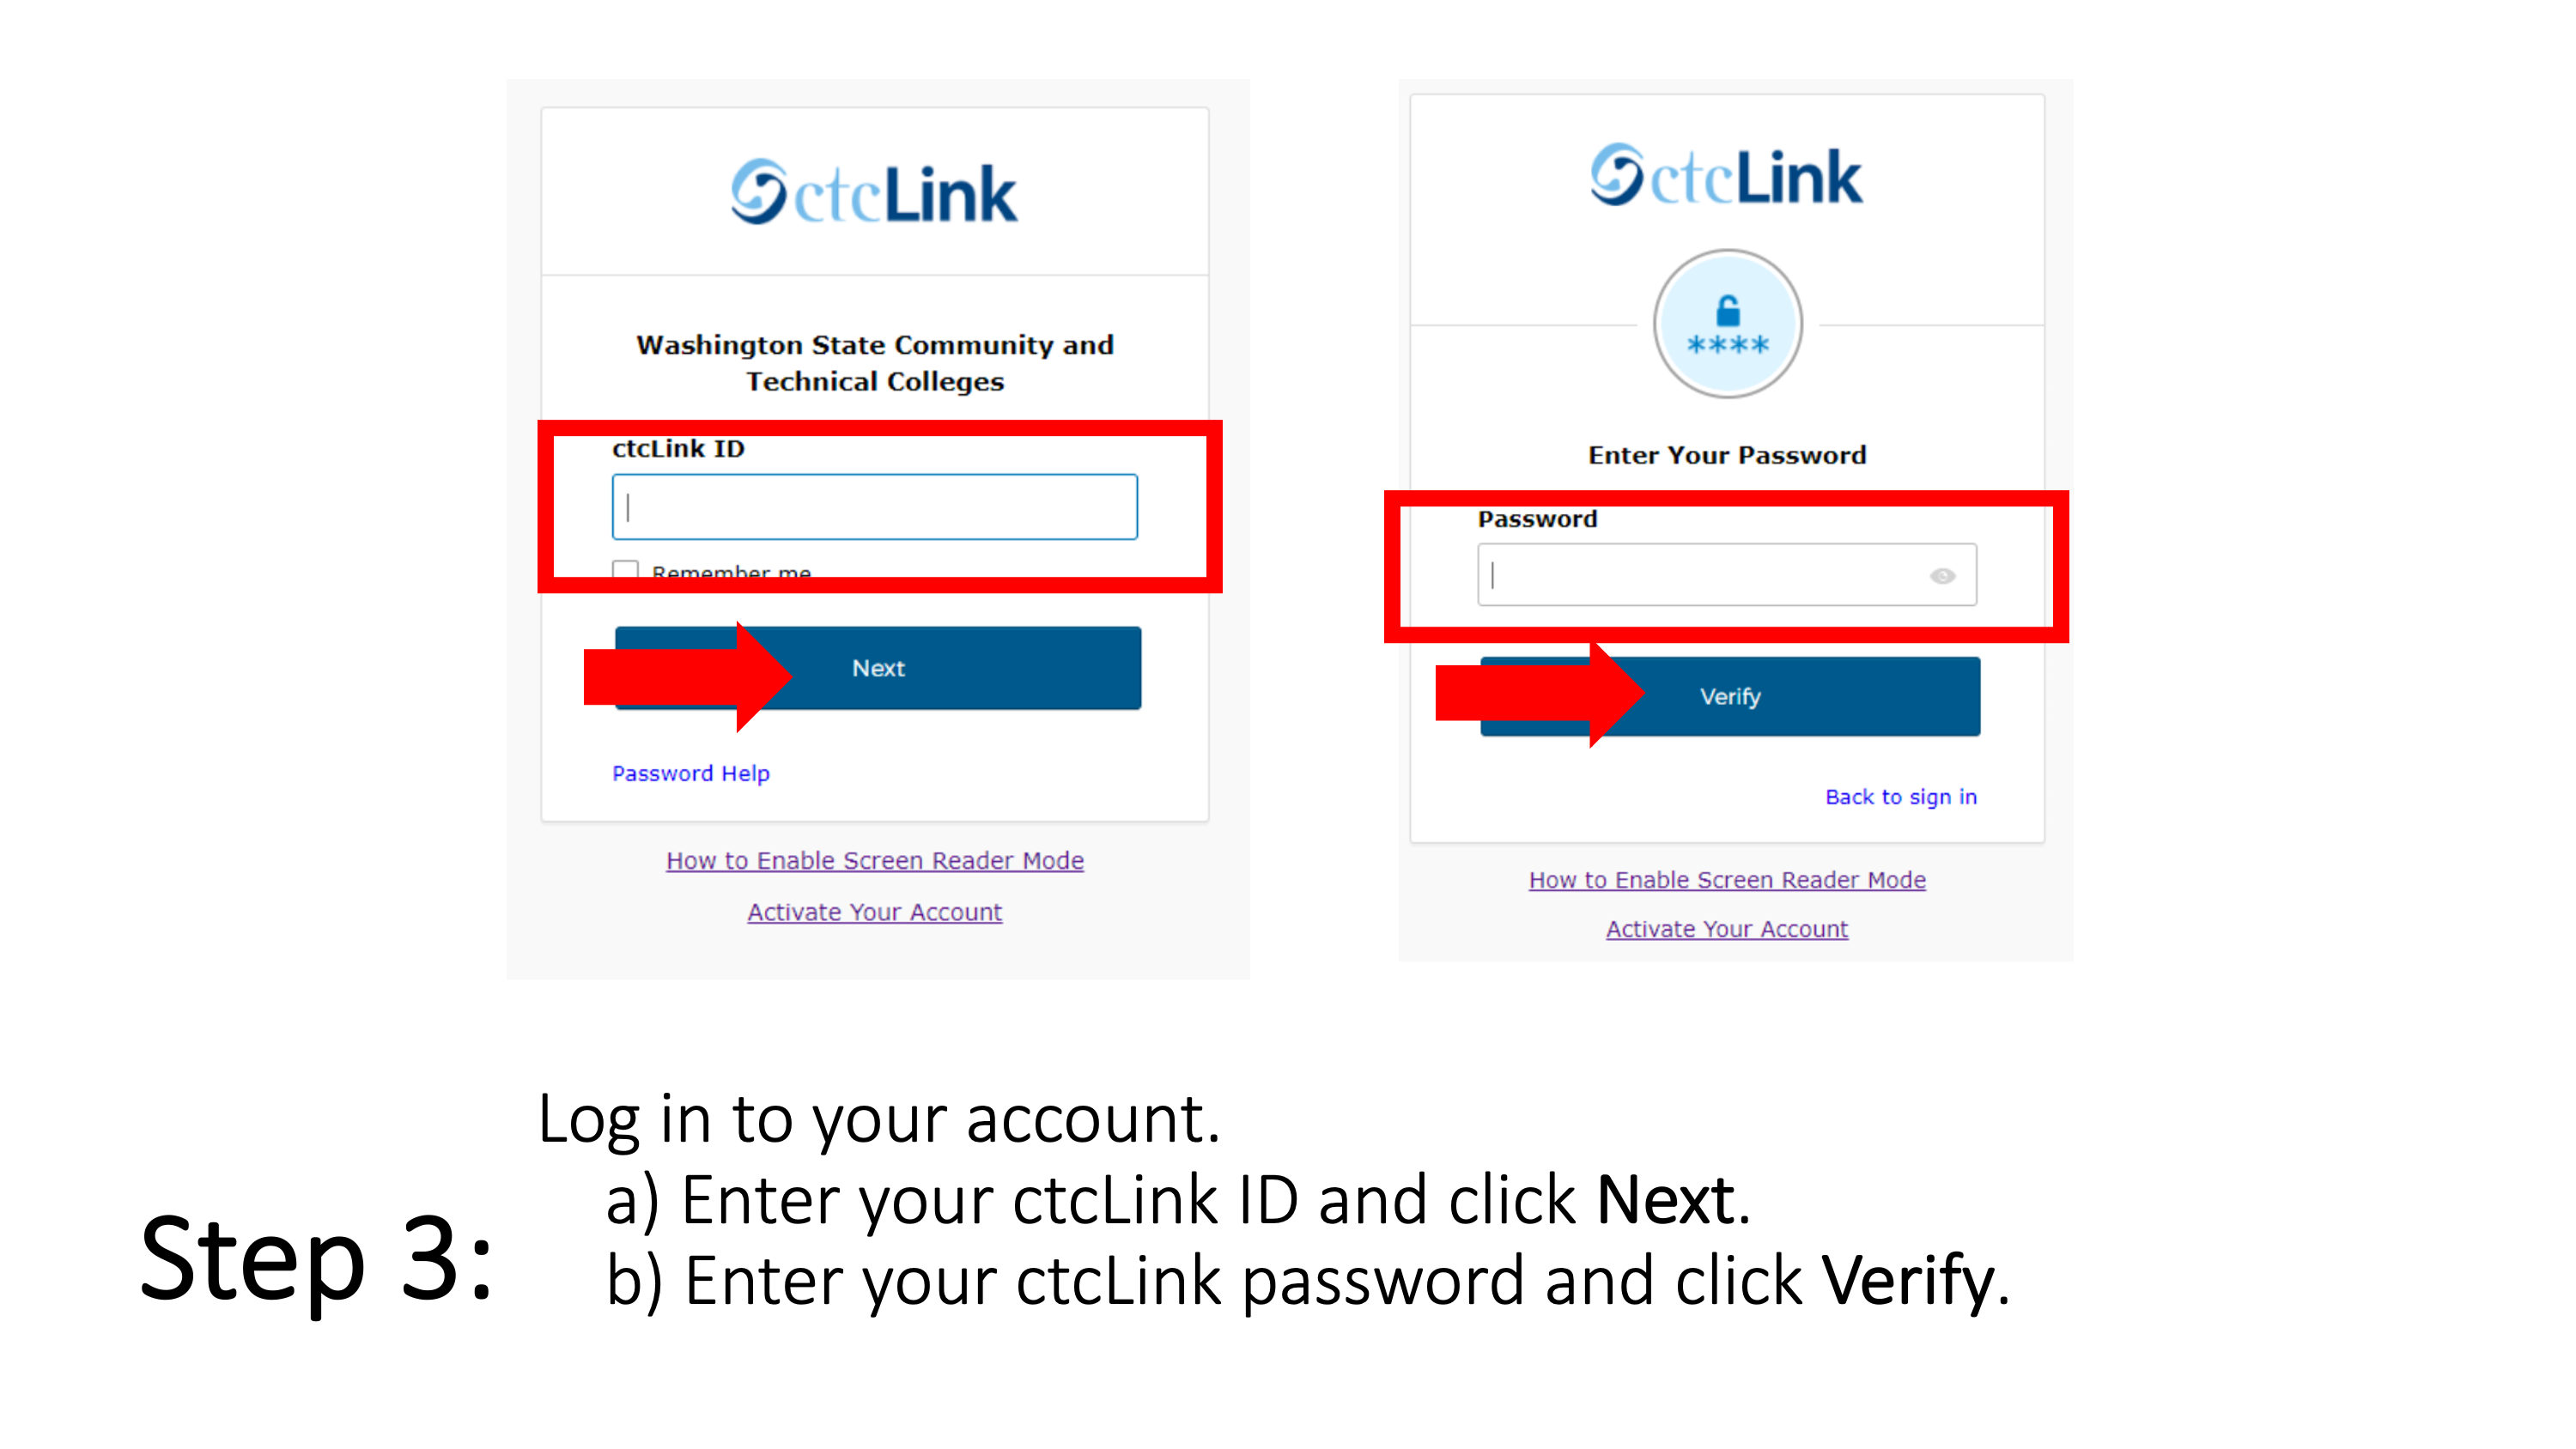 Step 3: Log in to your account. a) Enter your ctcLink ID and click Next. b) Enter your ctcLink password and click Verify